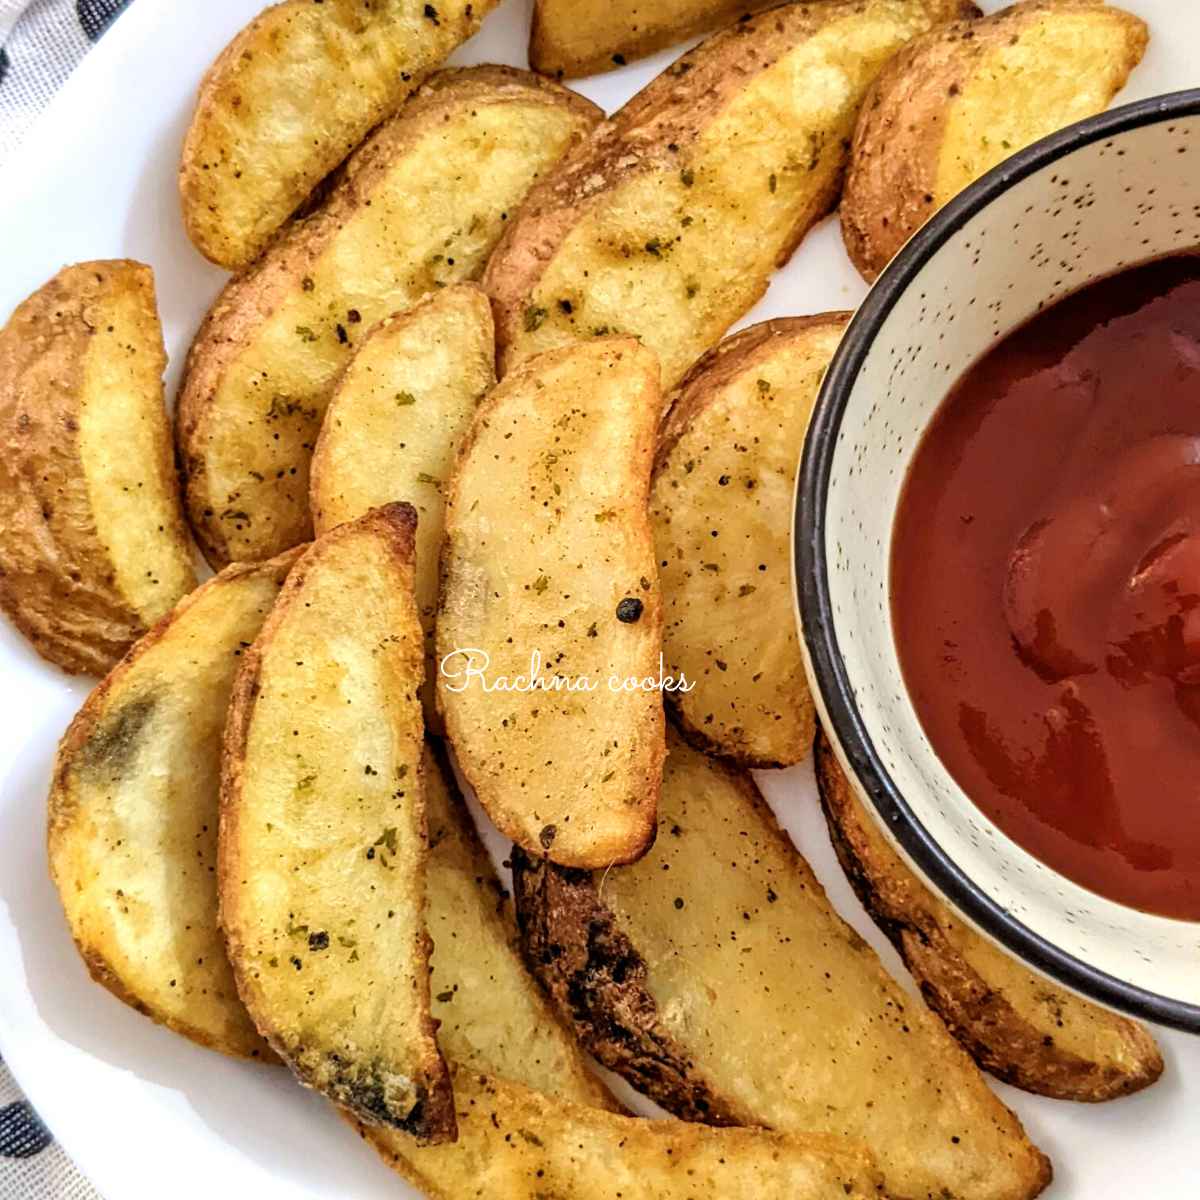 Crispy potato wedges served on a white plate with a dip in the bowl.